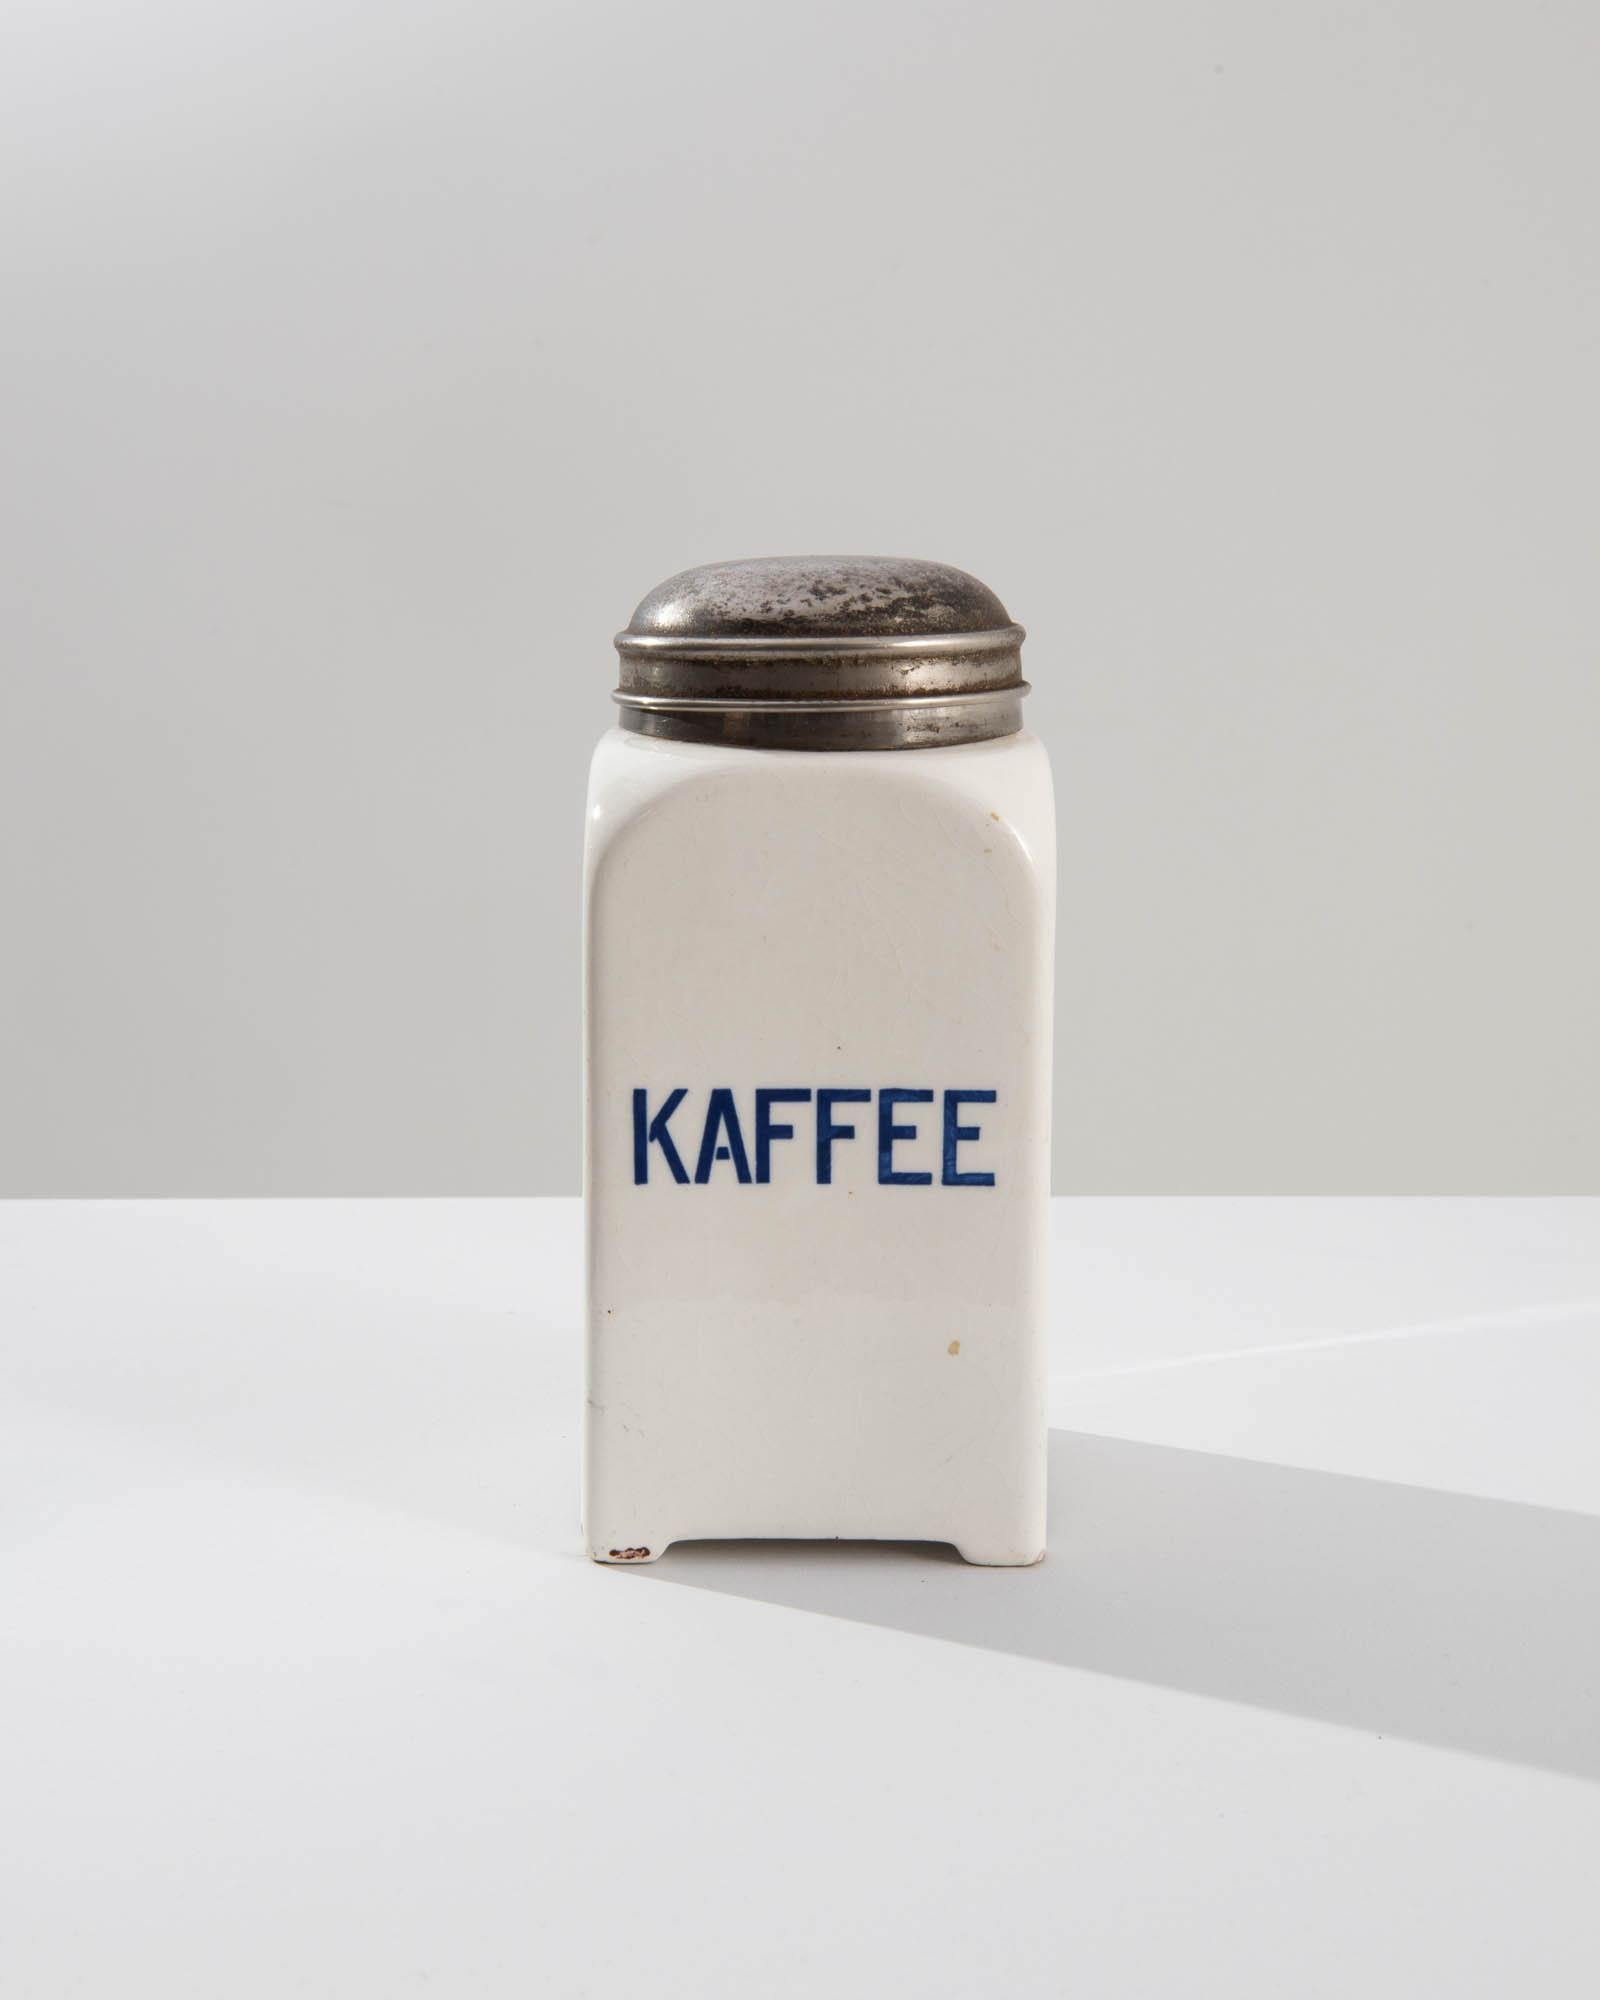 A vintage porcelain jar from 20th Century Germany, originally used for storing coffee. The slick white glaze is bright and inviting, attractive blue letters advertise the contents, ‘KAFFEE.’ Subtly ornamented the metal lids feature raised ridges,